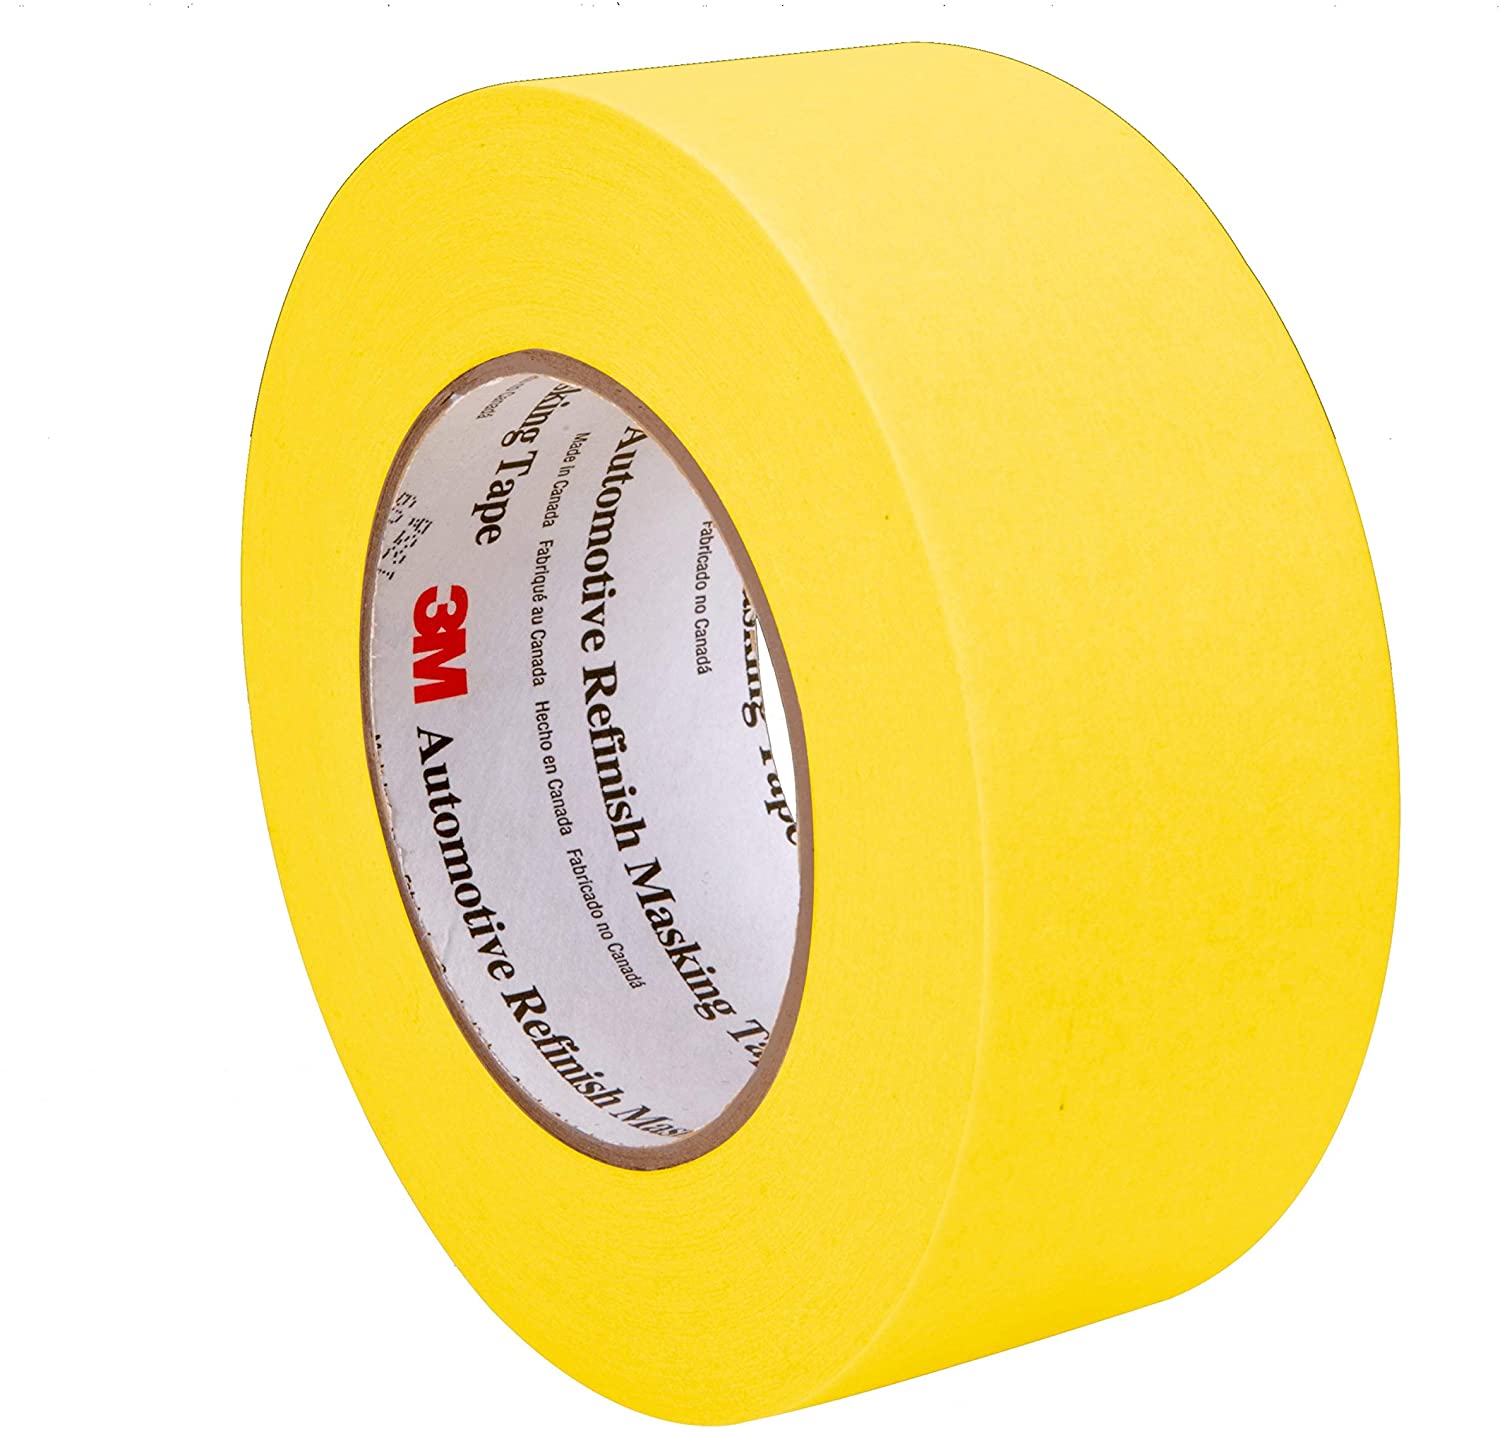 Colored Masking Tape For Automotive Painting Manufacturers and